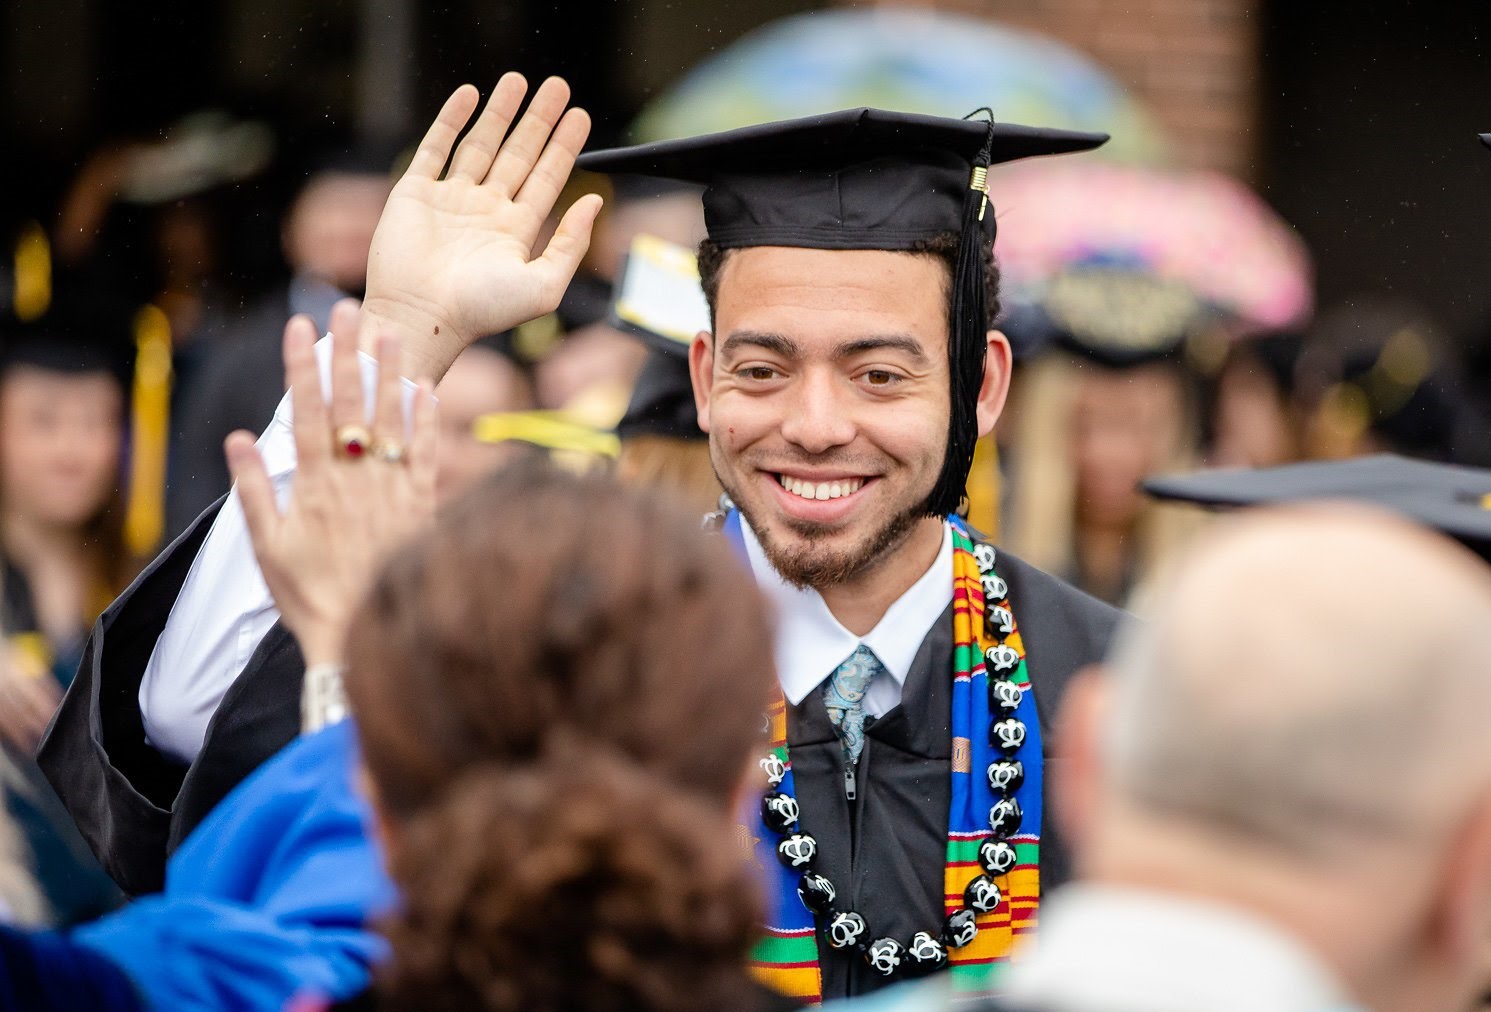 Student graduating giving a high five